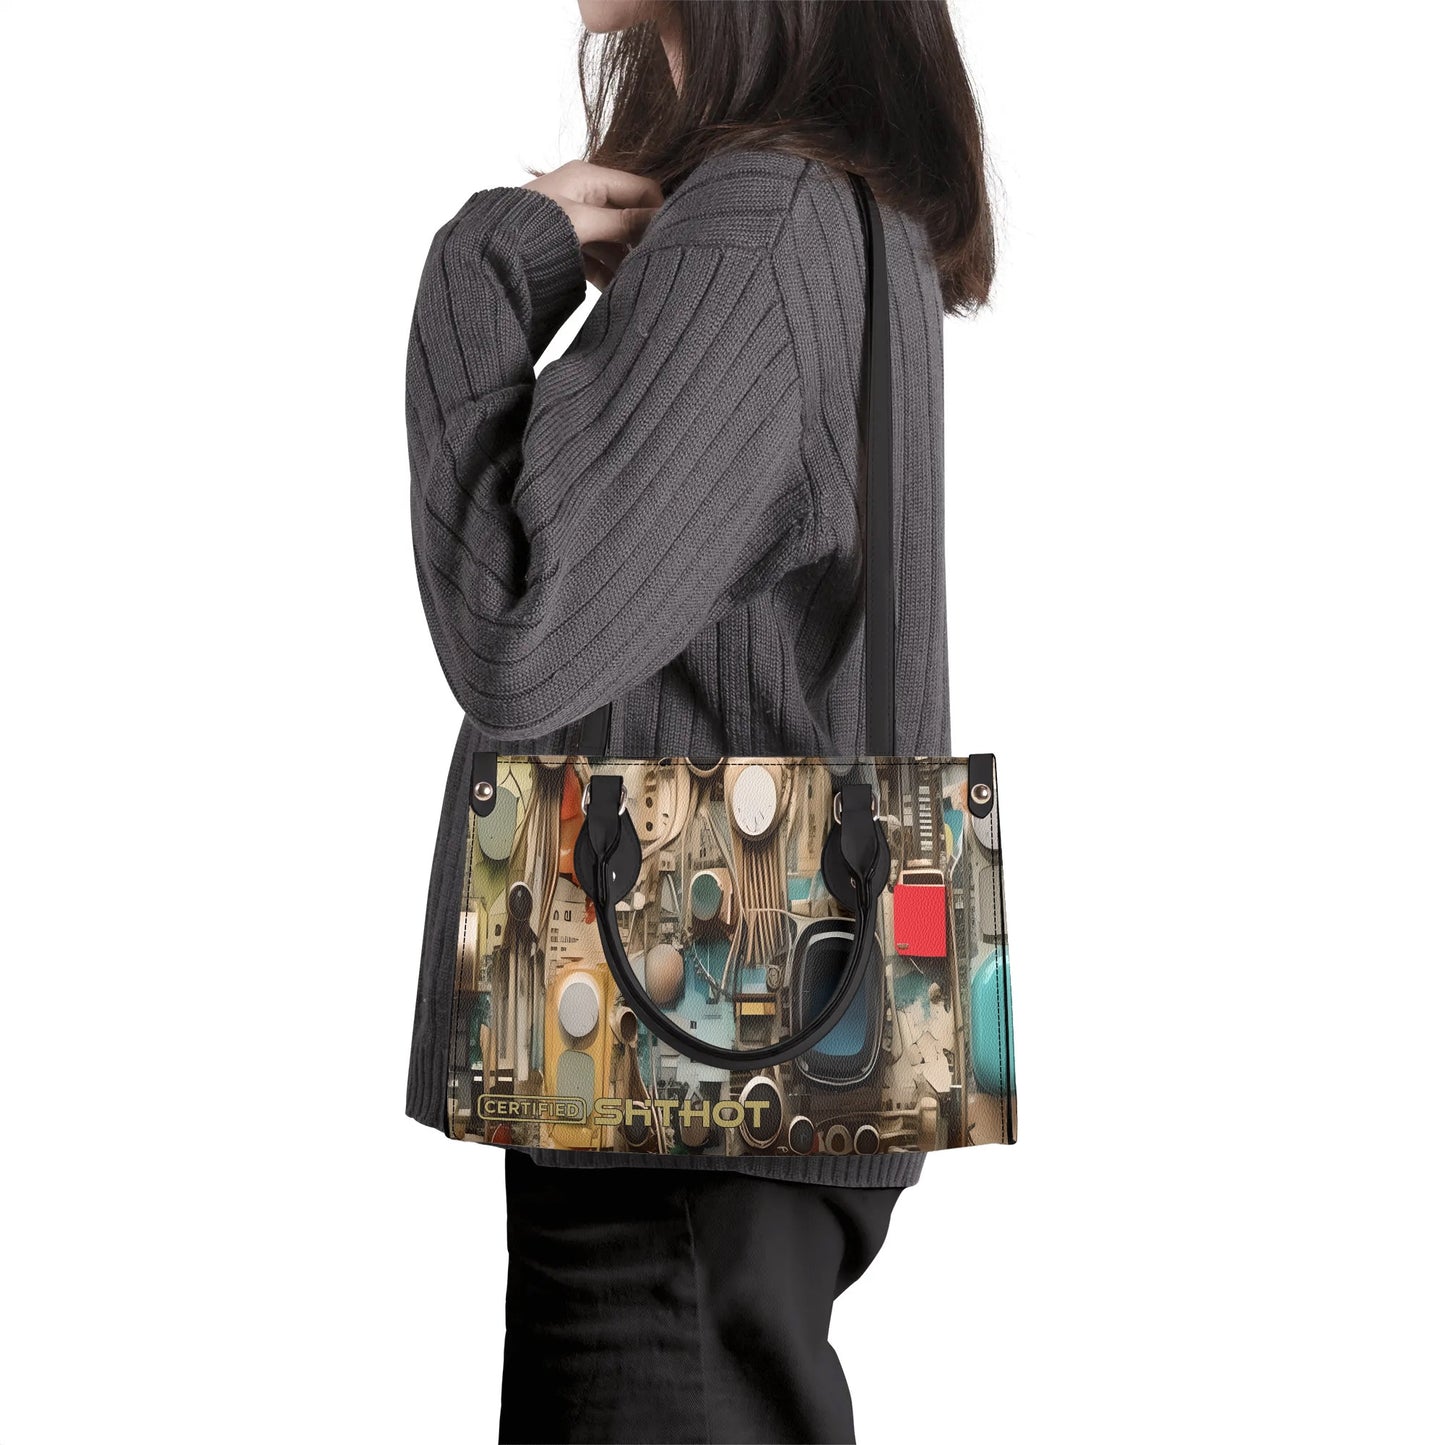 Womens Certified ShitHot Steampunk "The Tassel" Small Shoulder Bag -#theshithotcompany